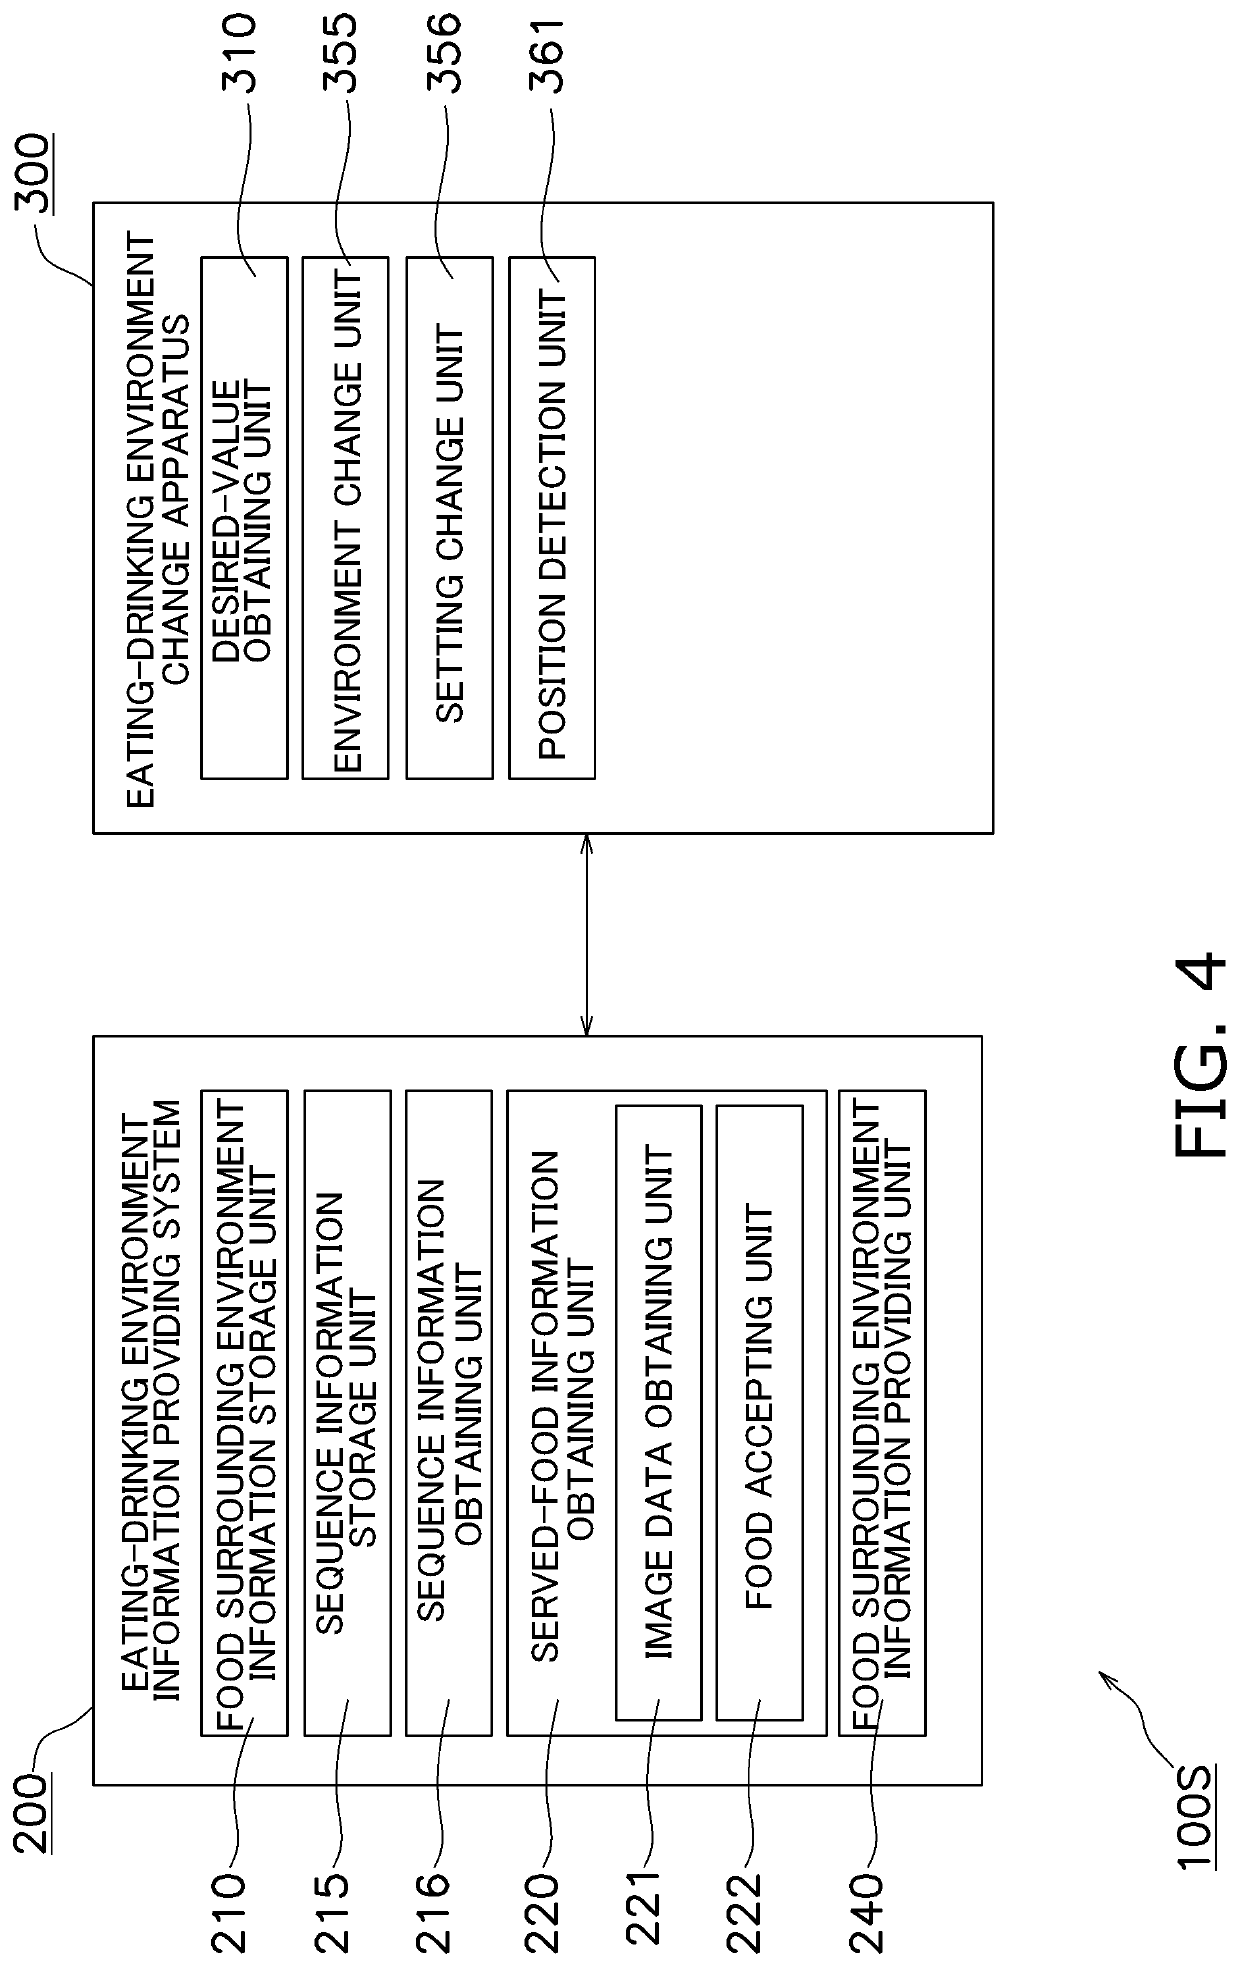 Eating-drinking environment control system, eating-drinking environment information providing system, and eating-drinking environment change apparatus